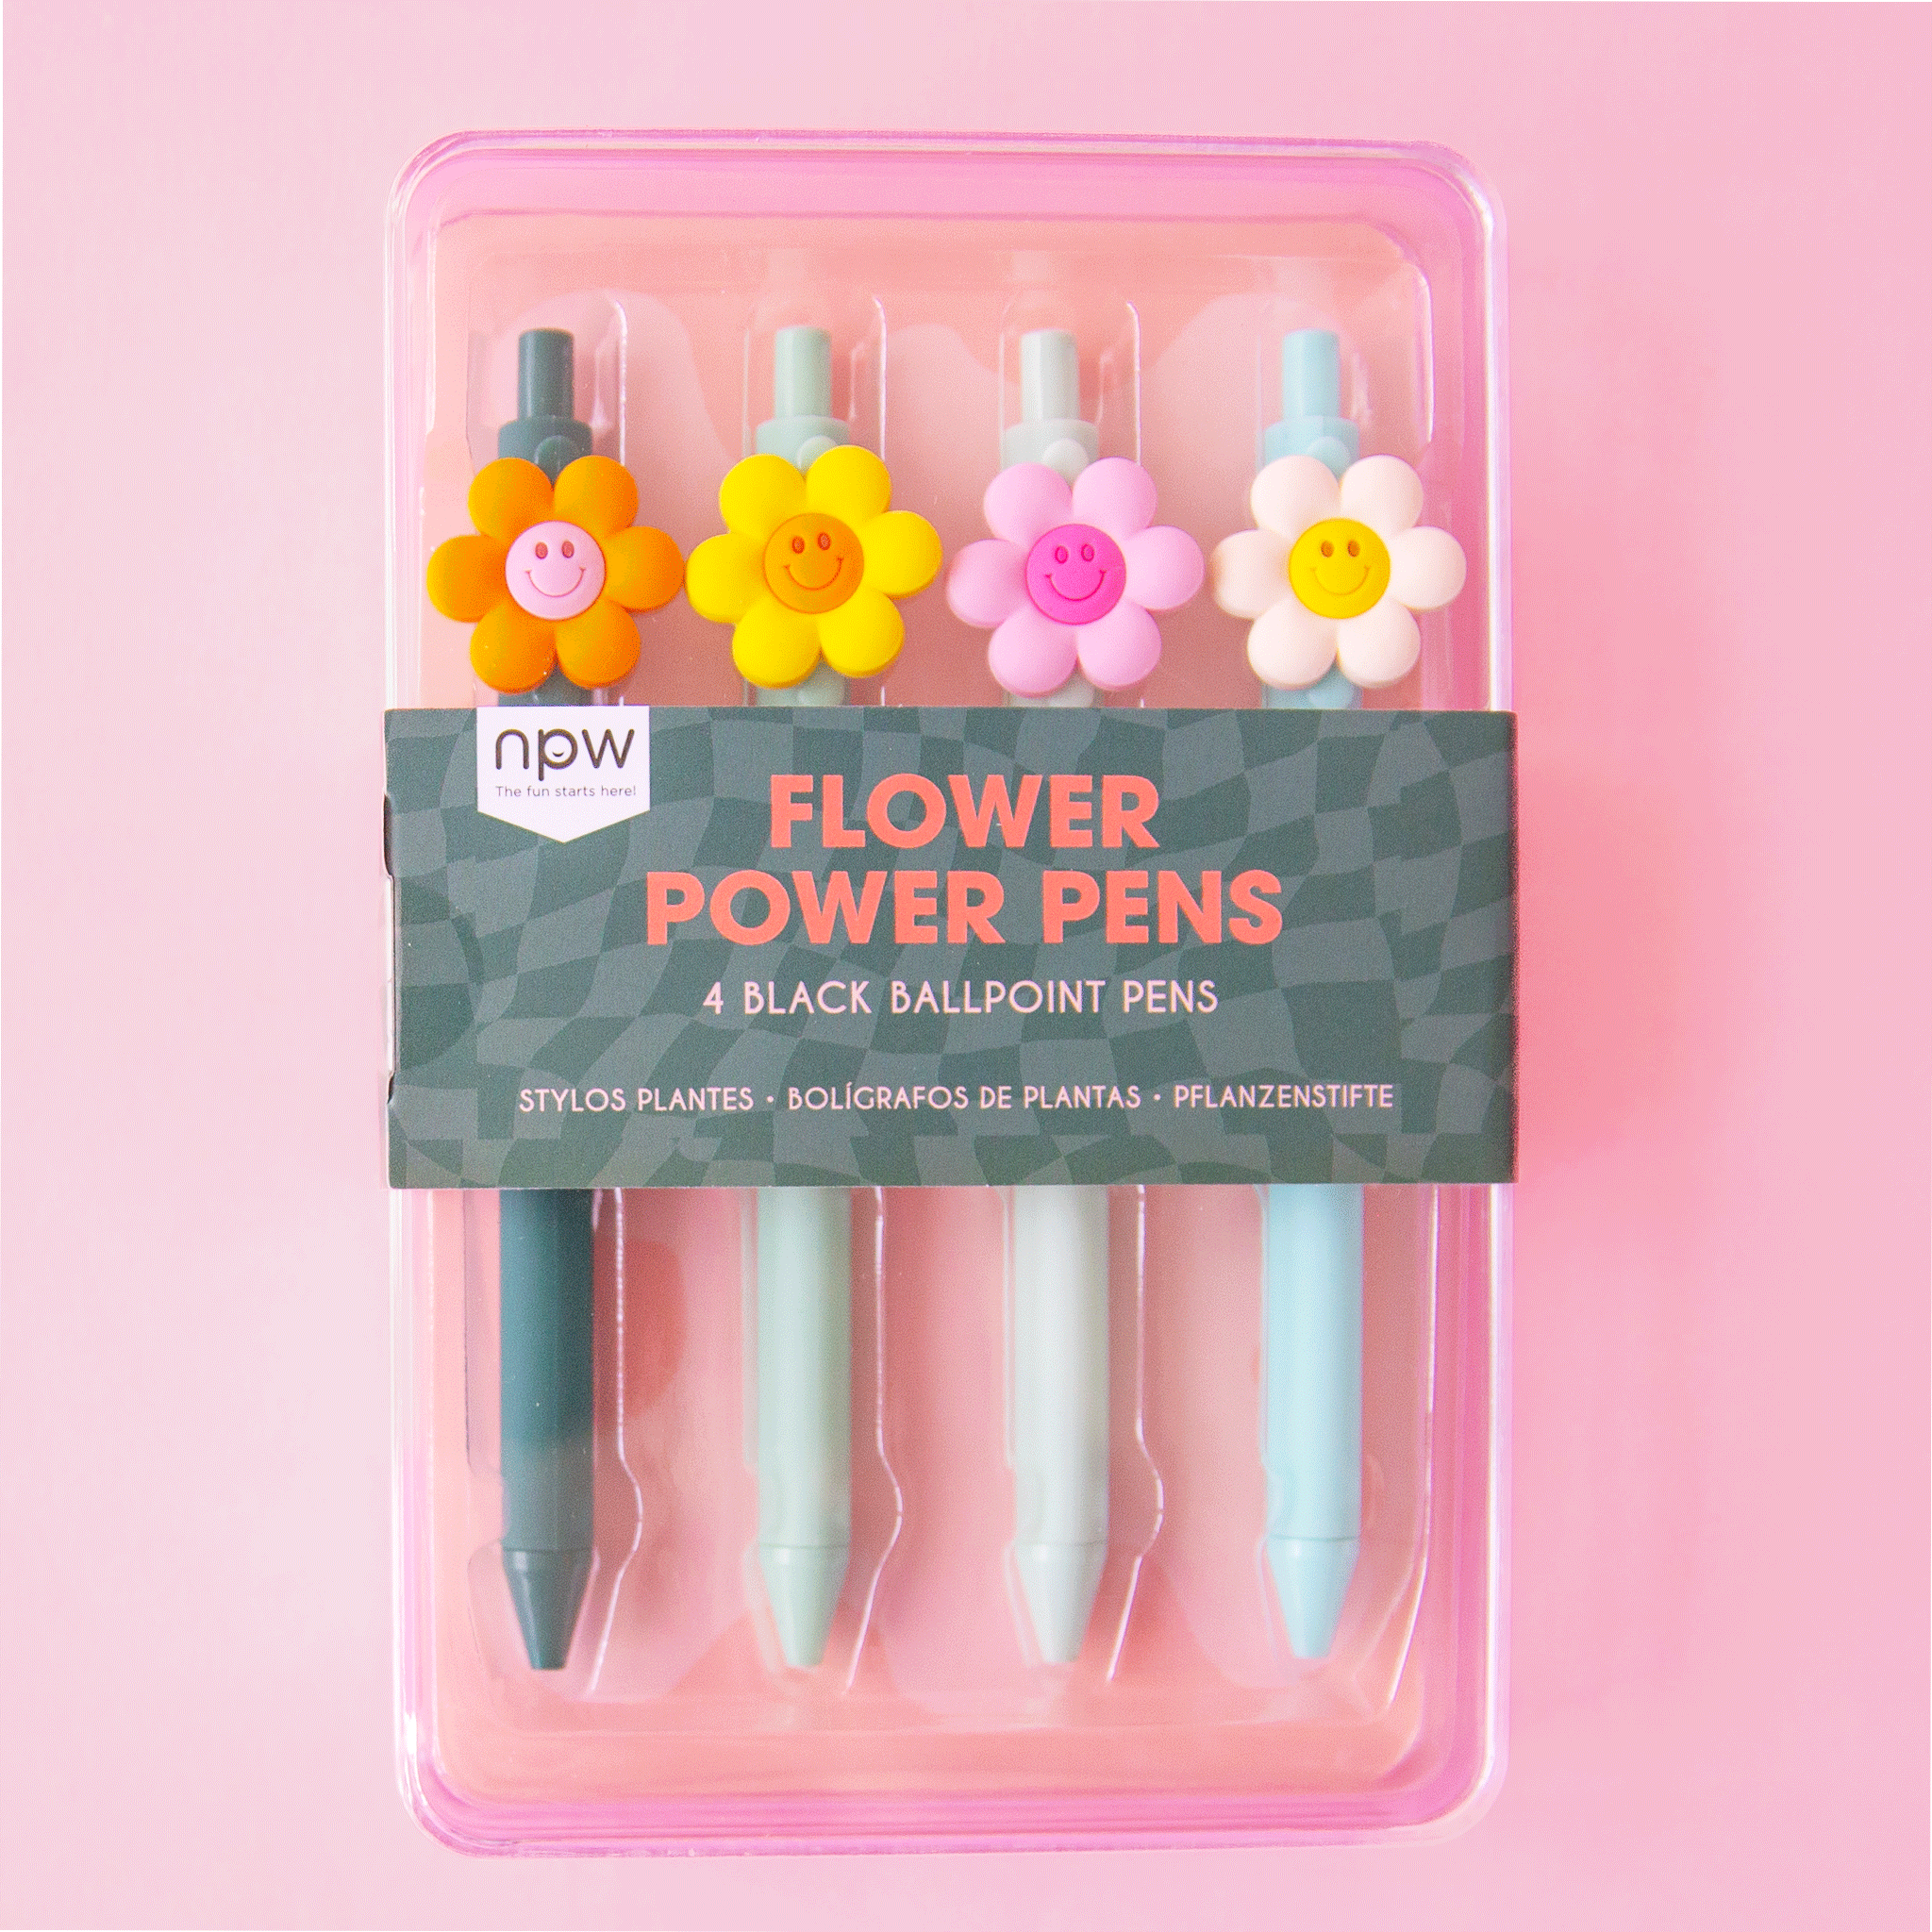 On a pink background is a set of four ballpoint pens with a 3D smiley face daisy on each one in a different color. The pens themselves range between shades of light blue and teal. 